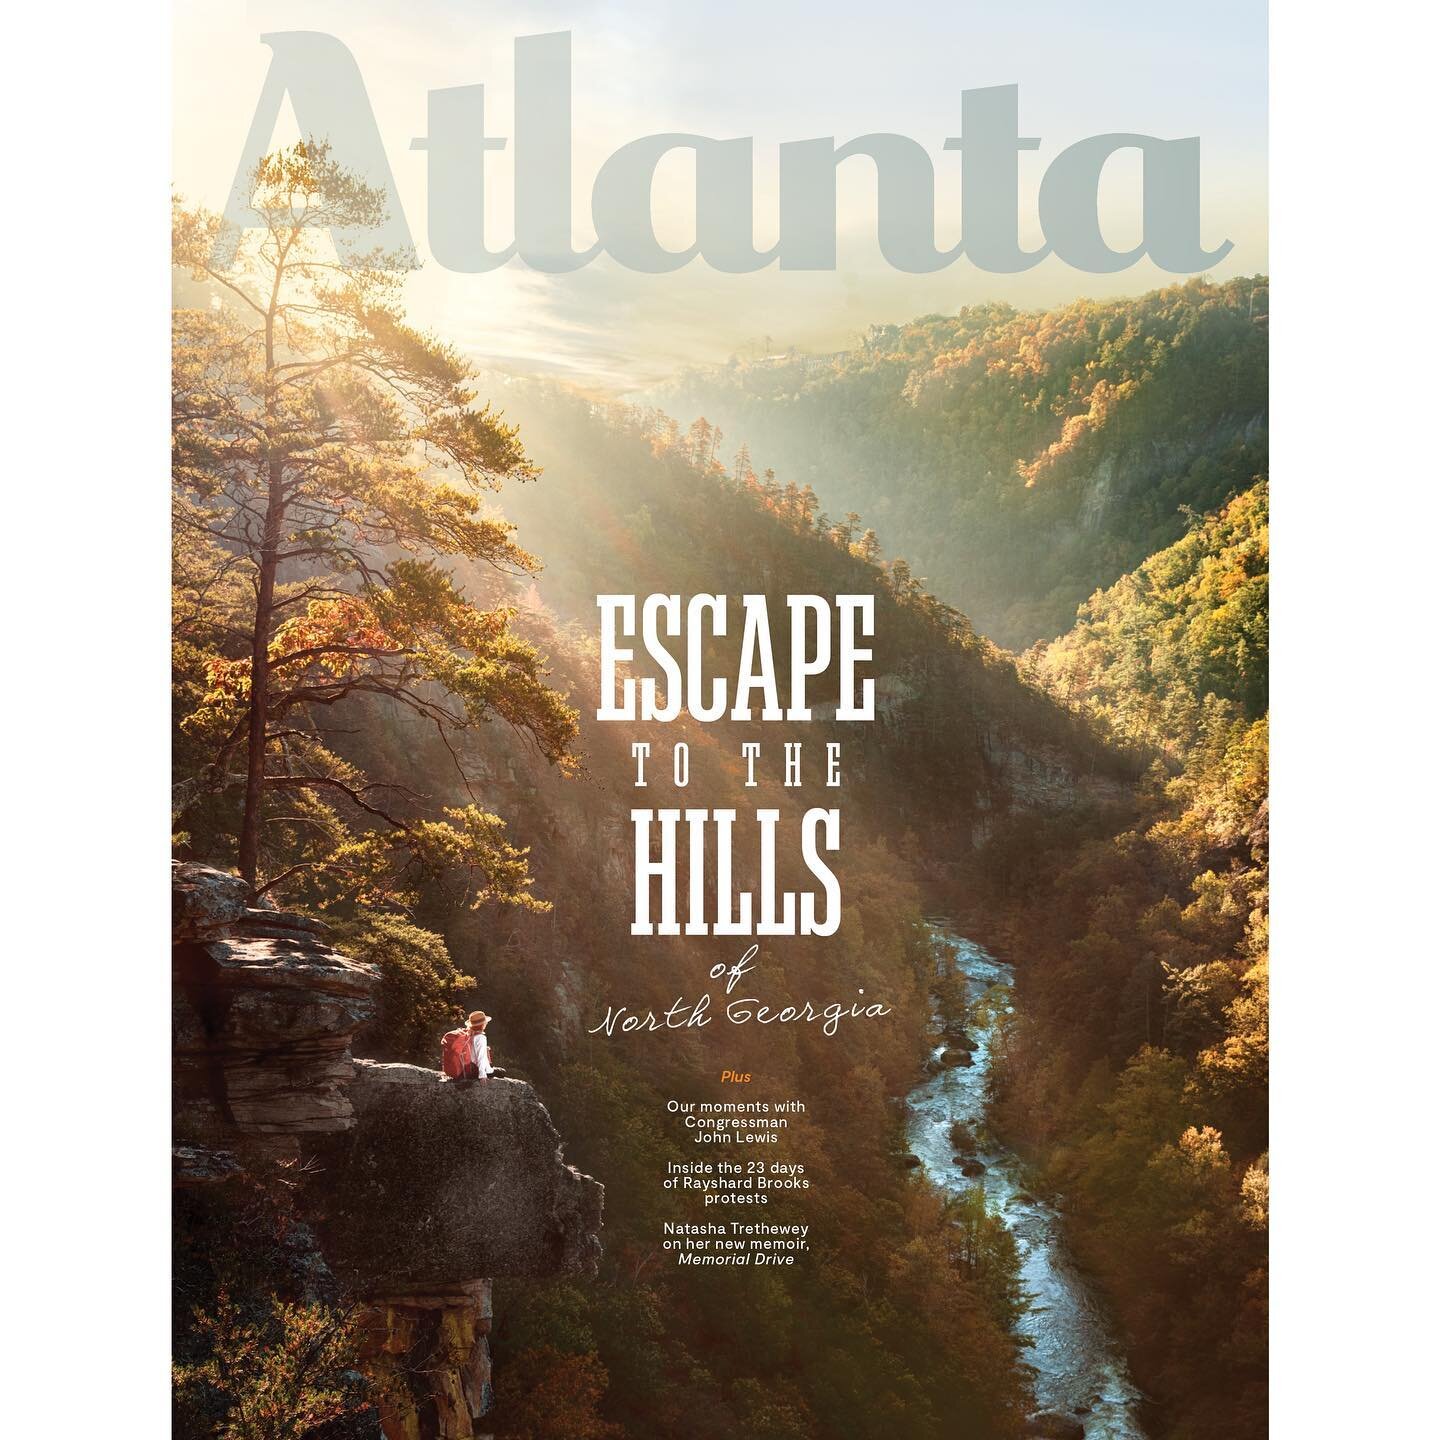 We are oh-so-honored to have photographed the cover story for the September issue of @atlantamagazine out on newsstands now! During this challenging and uncertain pandemic season, there is no better time to walk into the woods. Spending time in natur